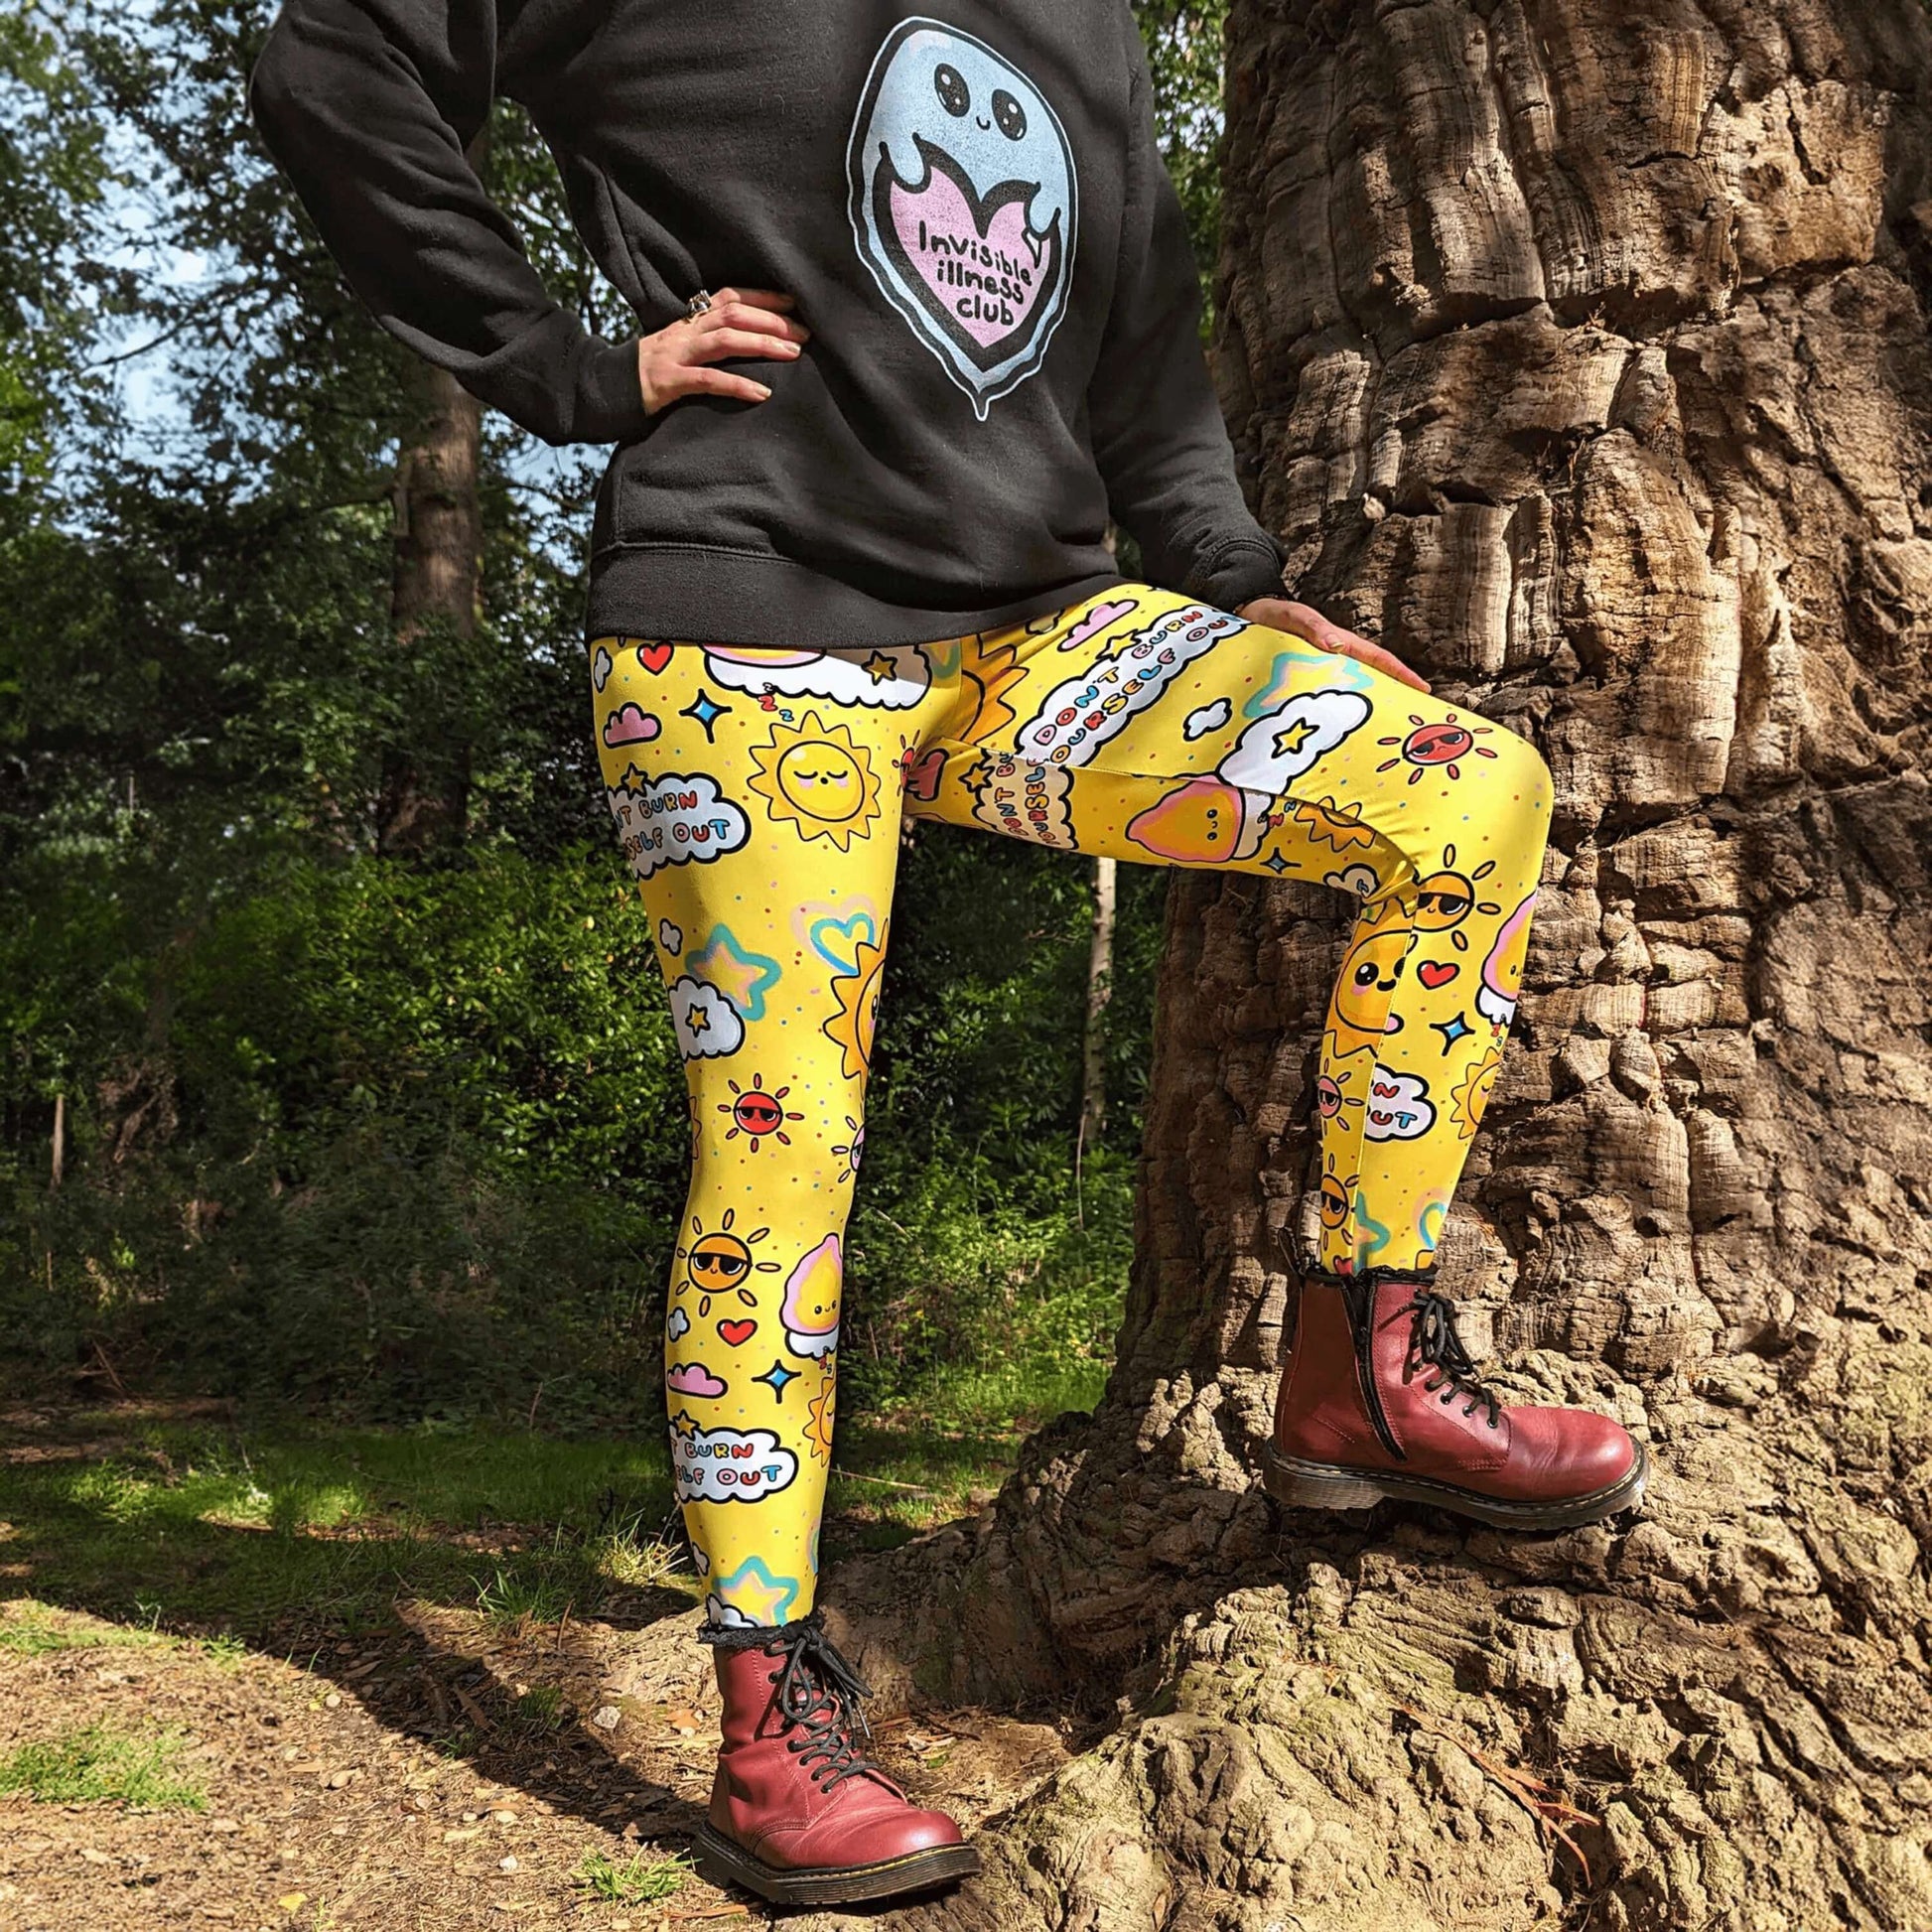 The Don't Burn Yourself Out Leggings being modelled by Nikky Box with an invisible illness club ghostie black sweater and red boots outside next to a tree in a forest. She is facing forward with one leg resting up on the tree and one hand on her hip, photo is cropped from the neck down. The print is yellow with various kawaii face sunshines, sparkles, hearts, pink flames and pink, blue and white clouds with don't burn yourself out inside in rainbow. Design inspired by the self care movement.